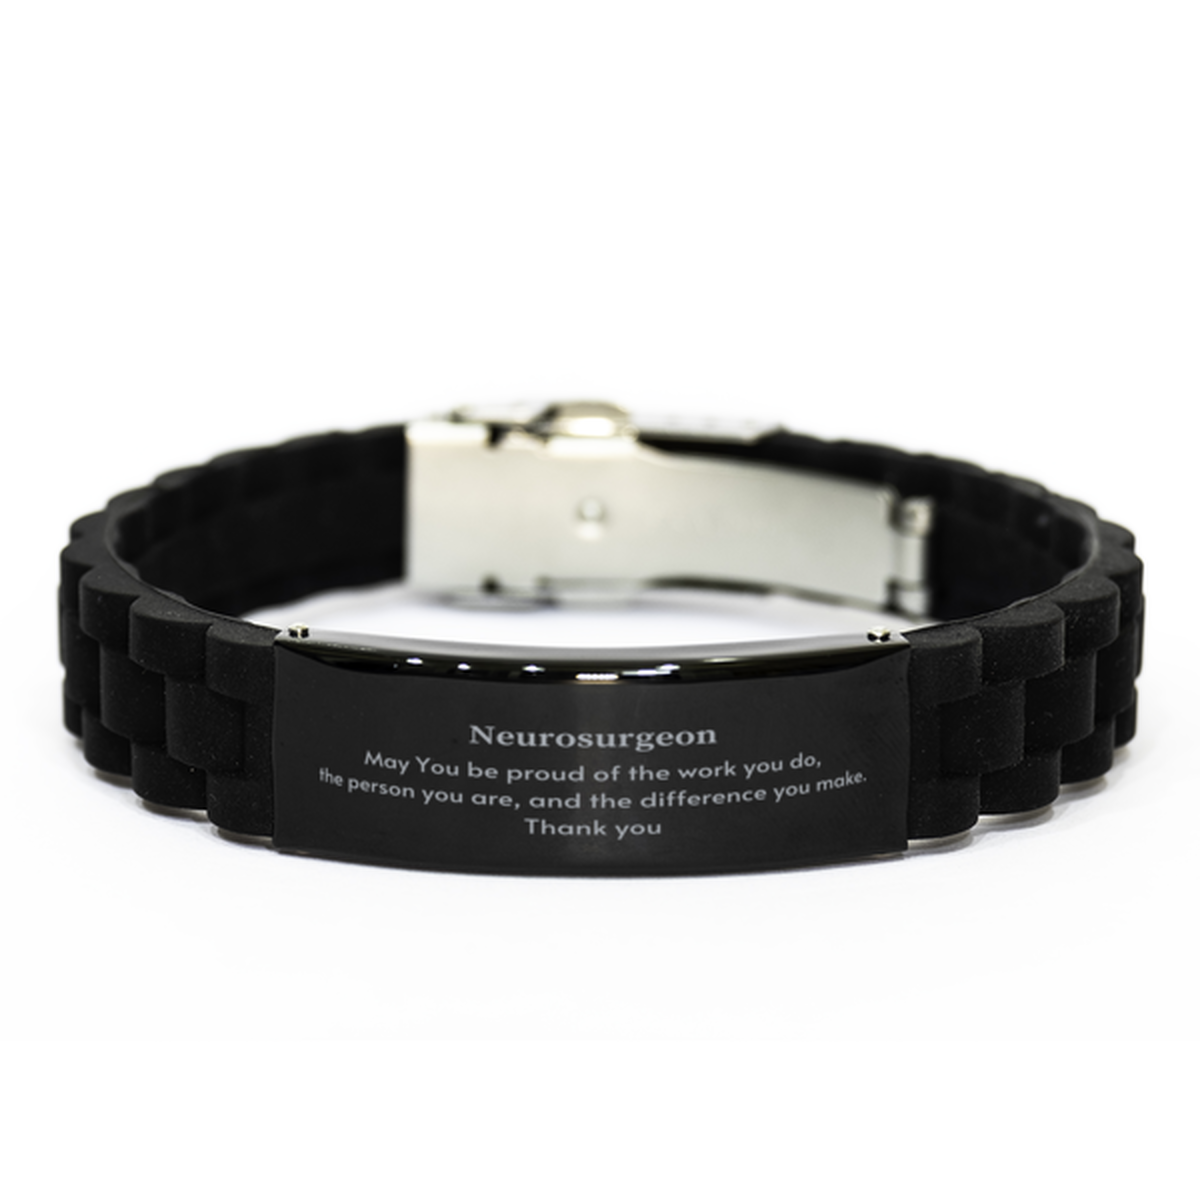 Heartwarming Black Glidelock Clasp Bracelet Retirement Coworkers Gifts for Neurosurgeon, Neurosurgeon May You be proud of the work you do, the person you are Gifts for Boss Men Women Friends